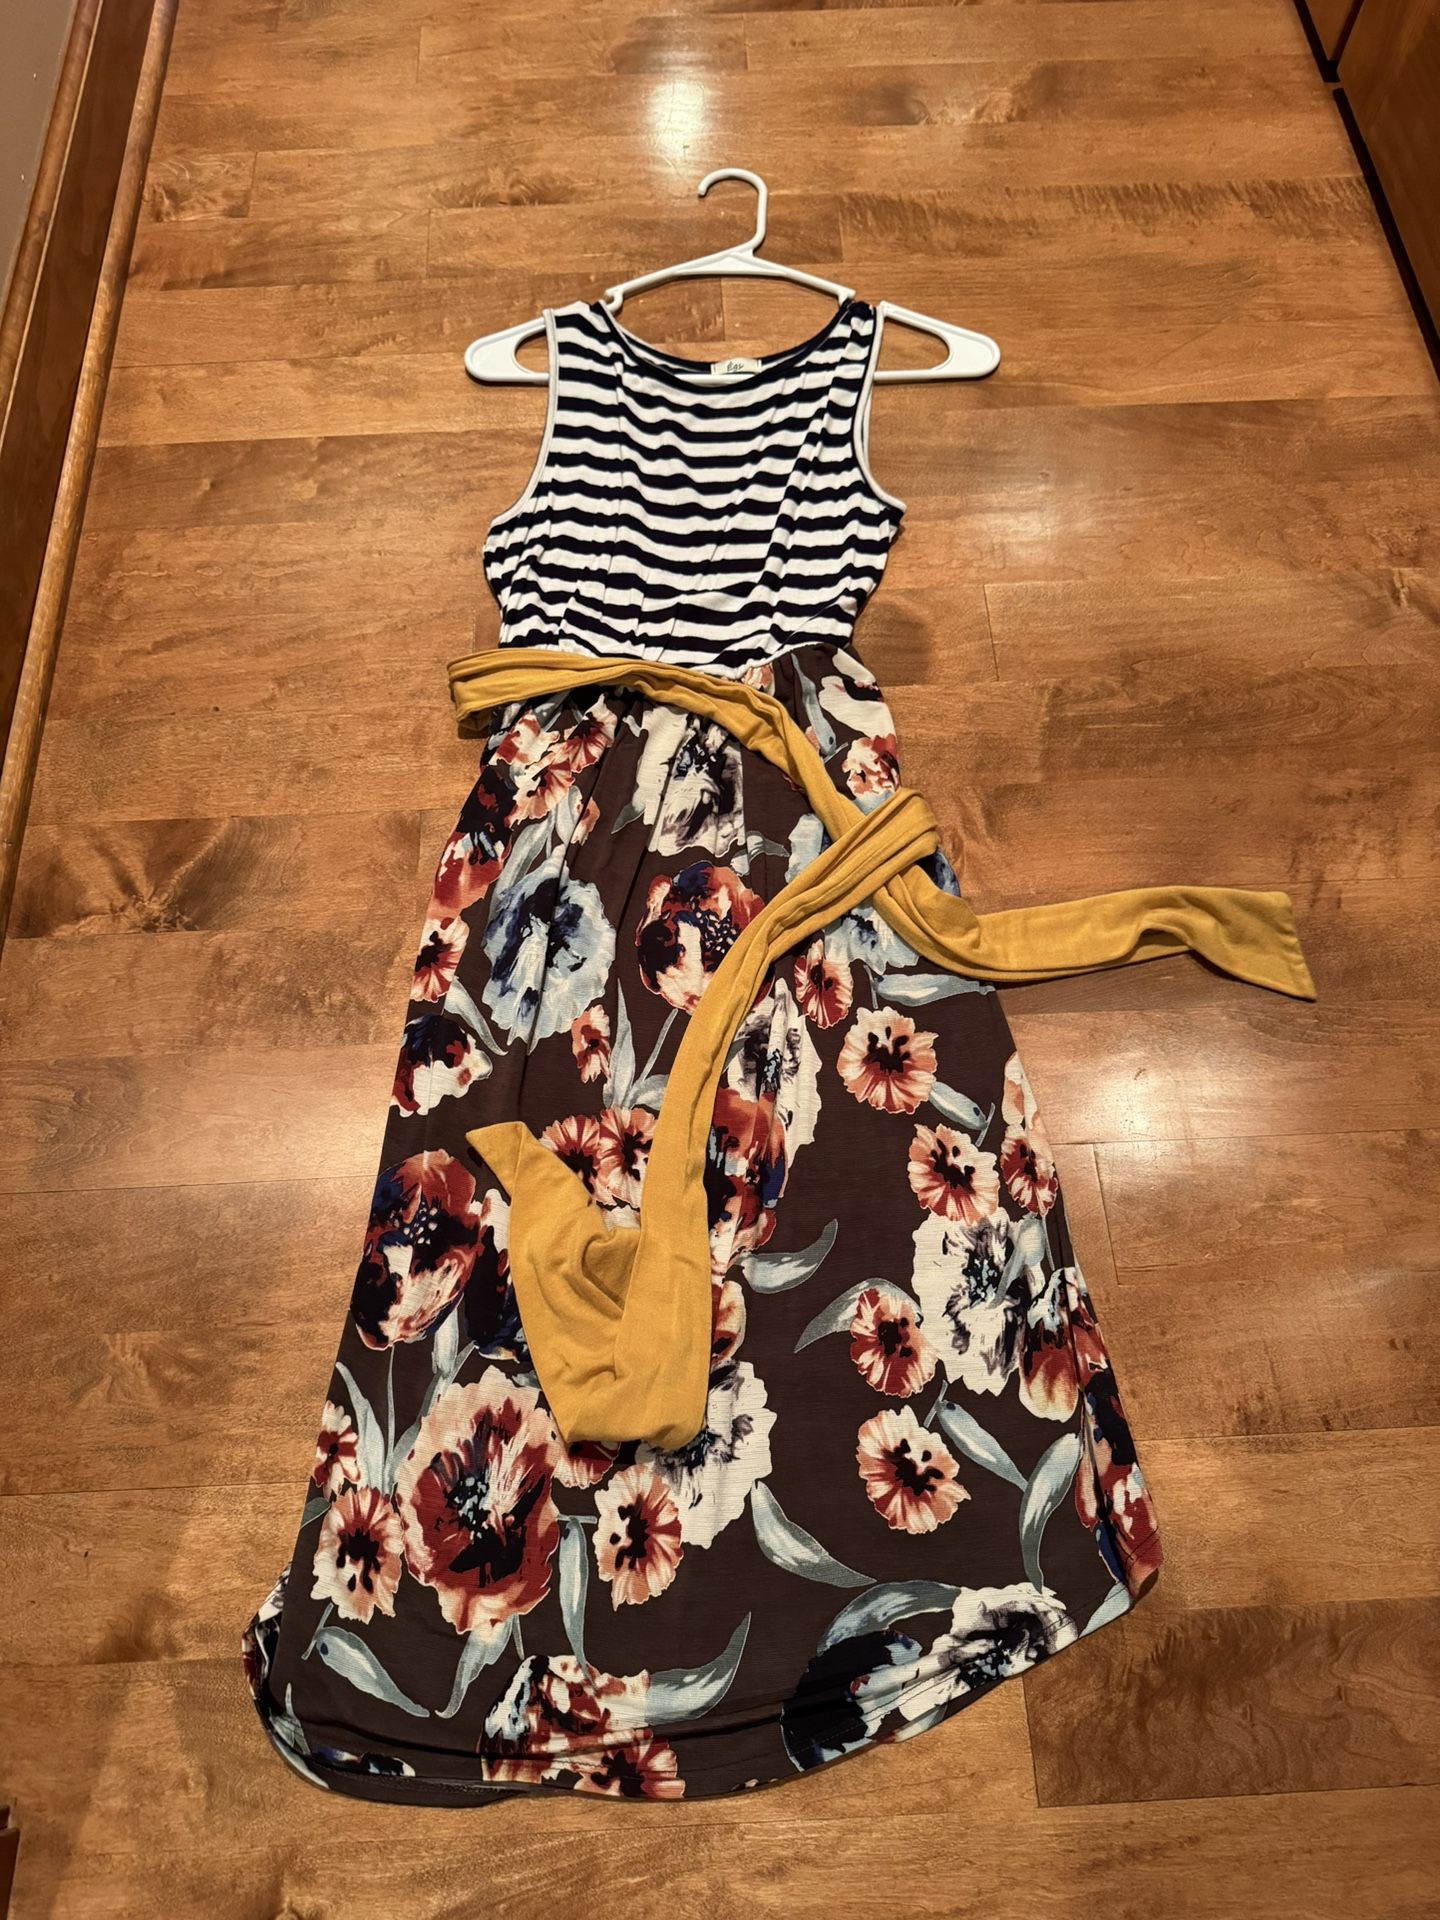 Woman’s Cute Boutique Dress Shipping Available